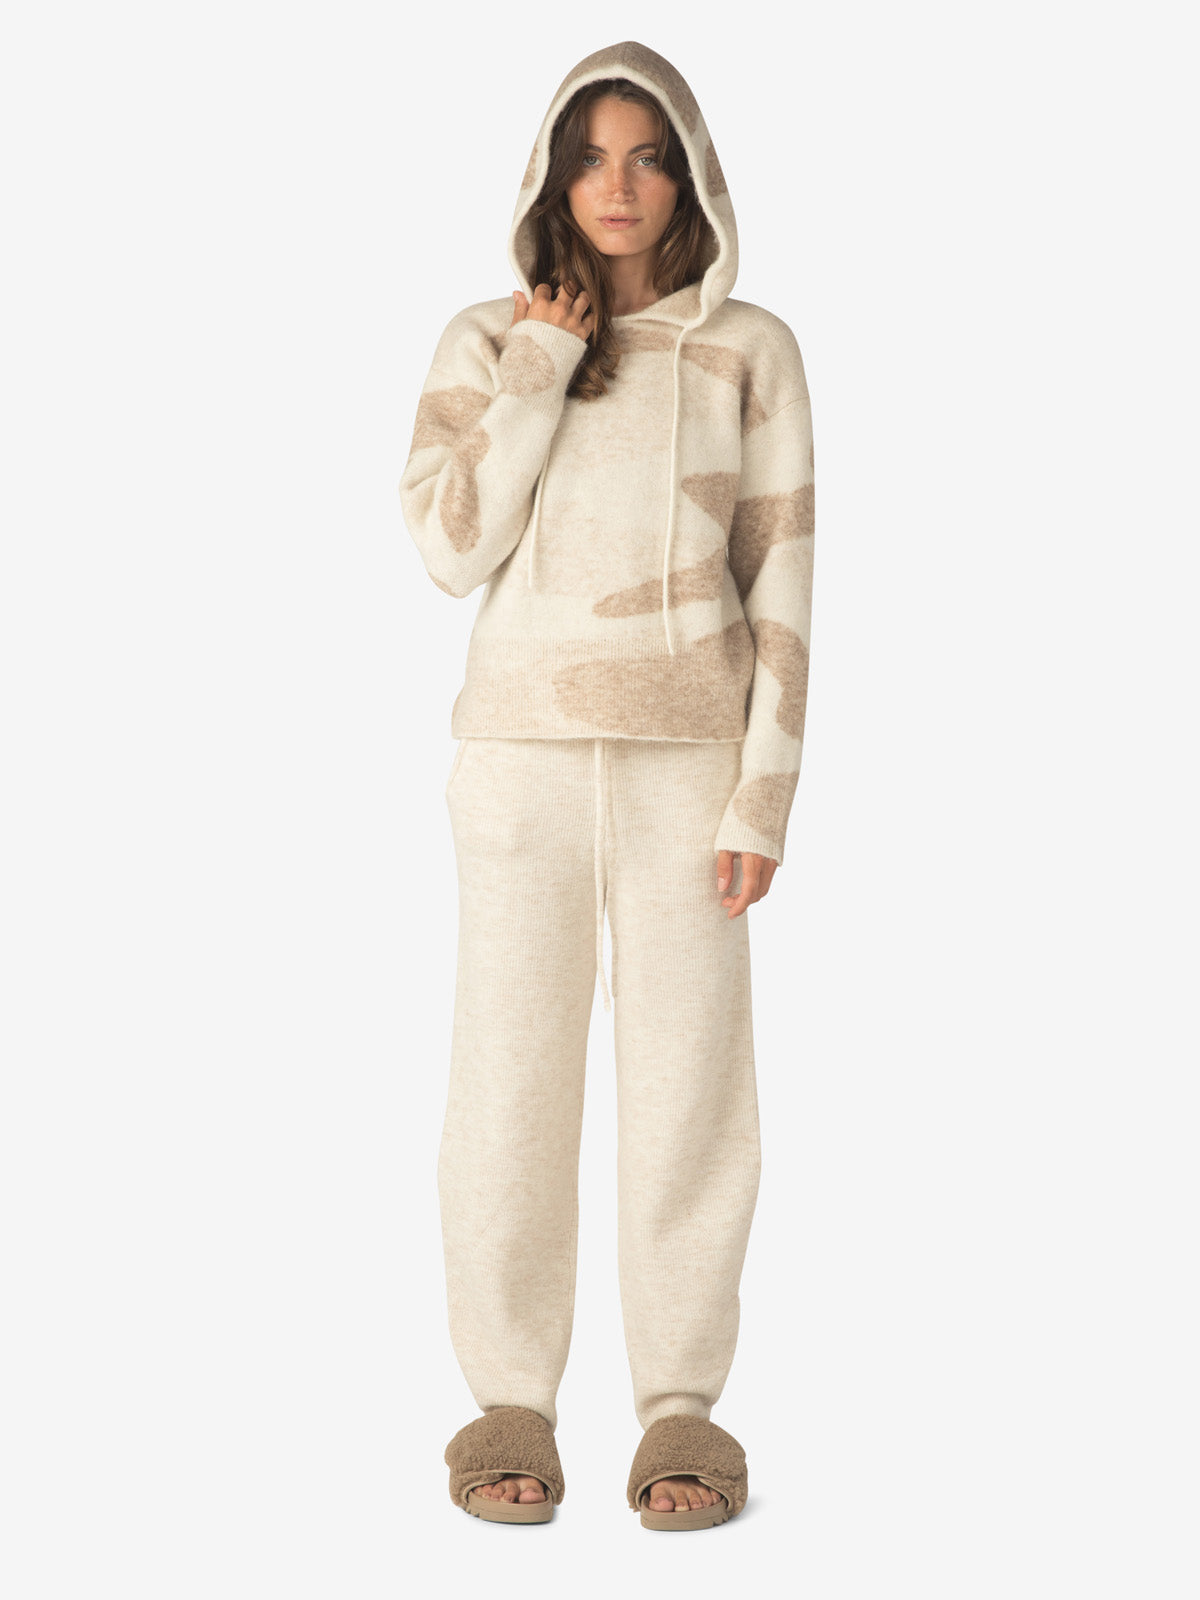 Woman CHALET HOODIE - Cream Camo - front